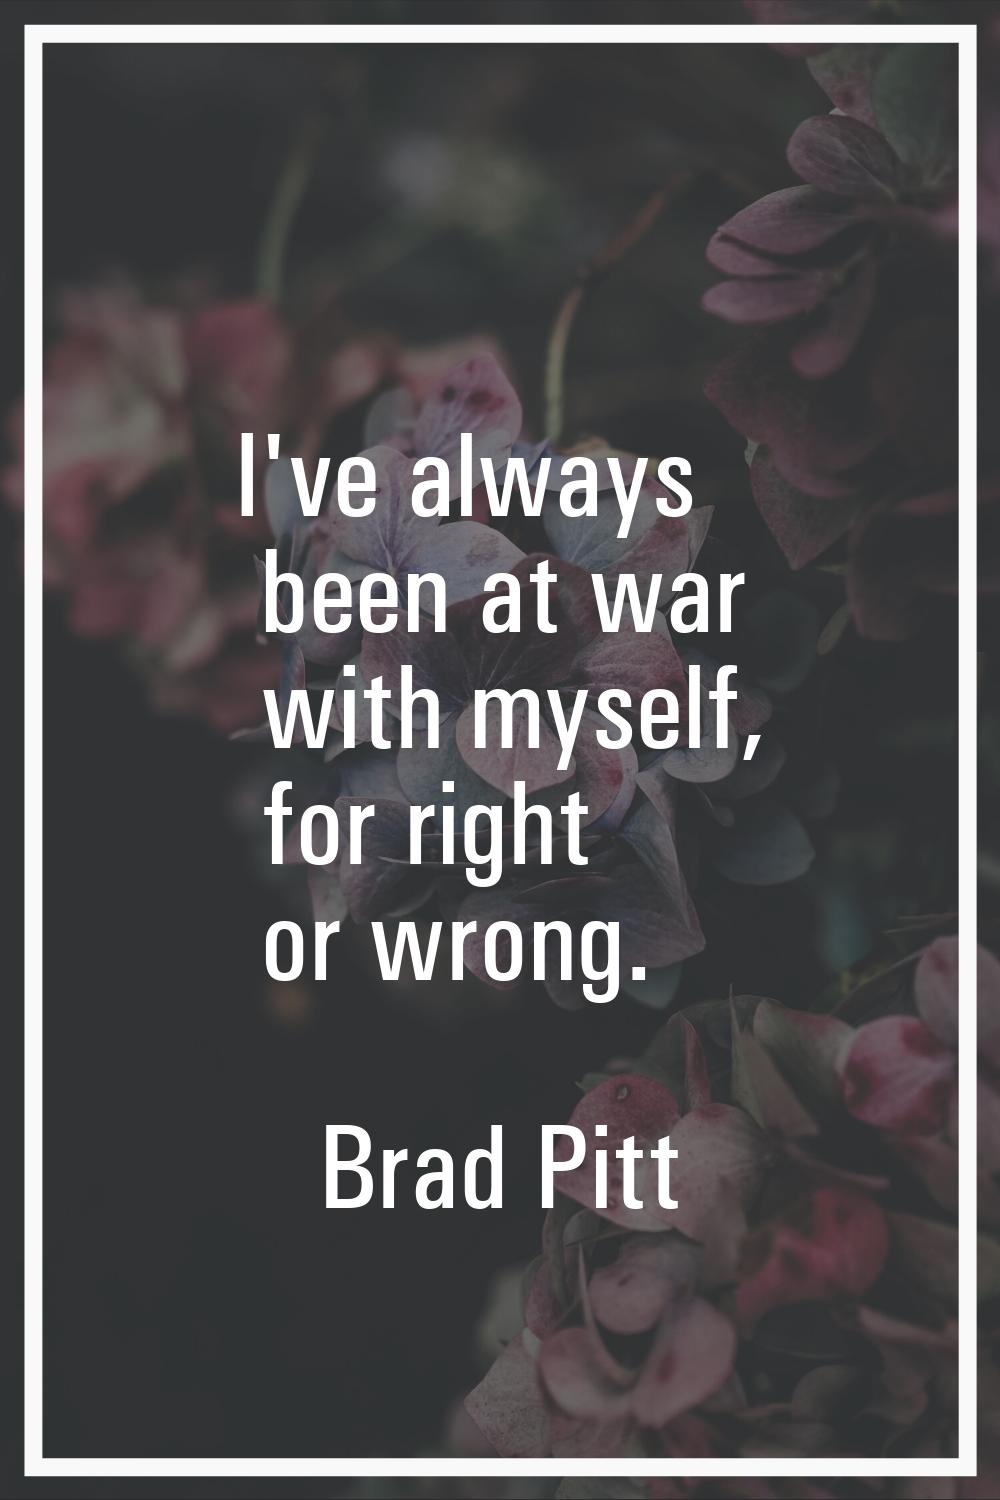 I've always been at war with myself, for right or wrong.